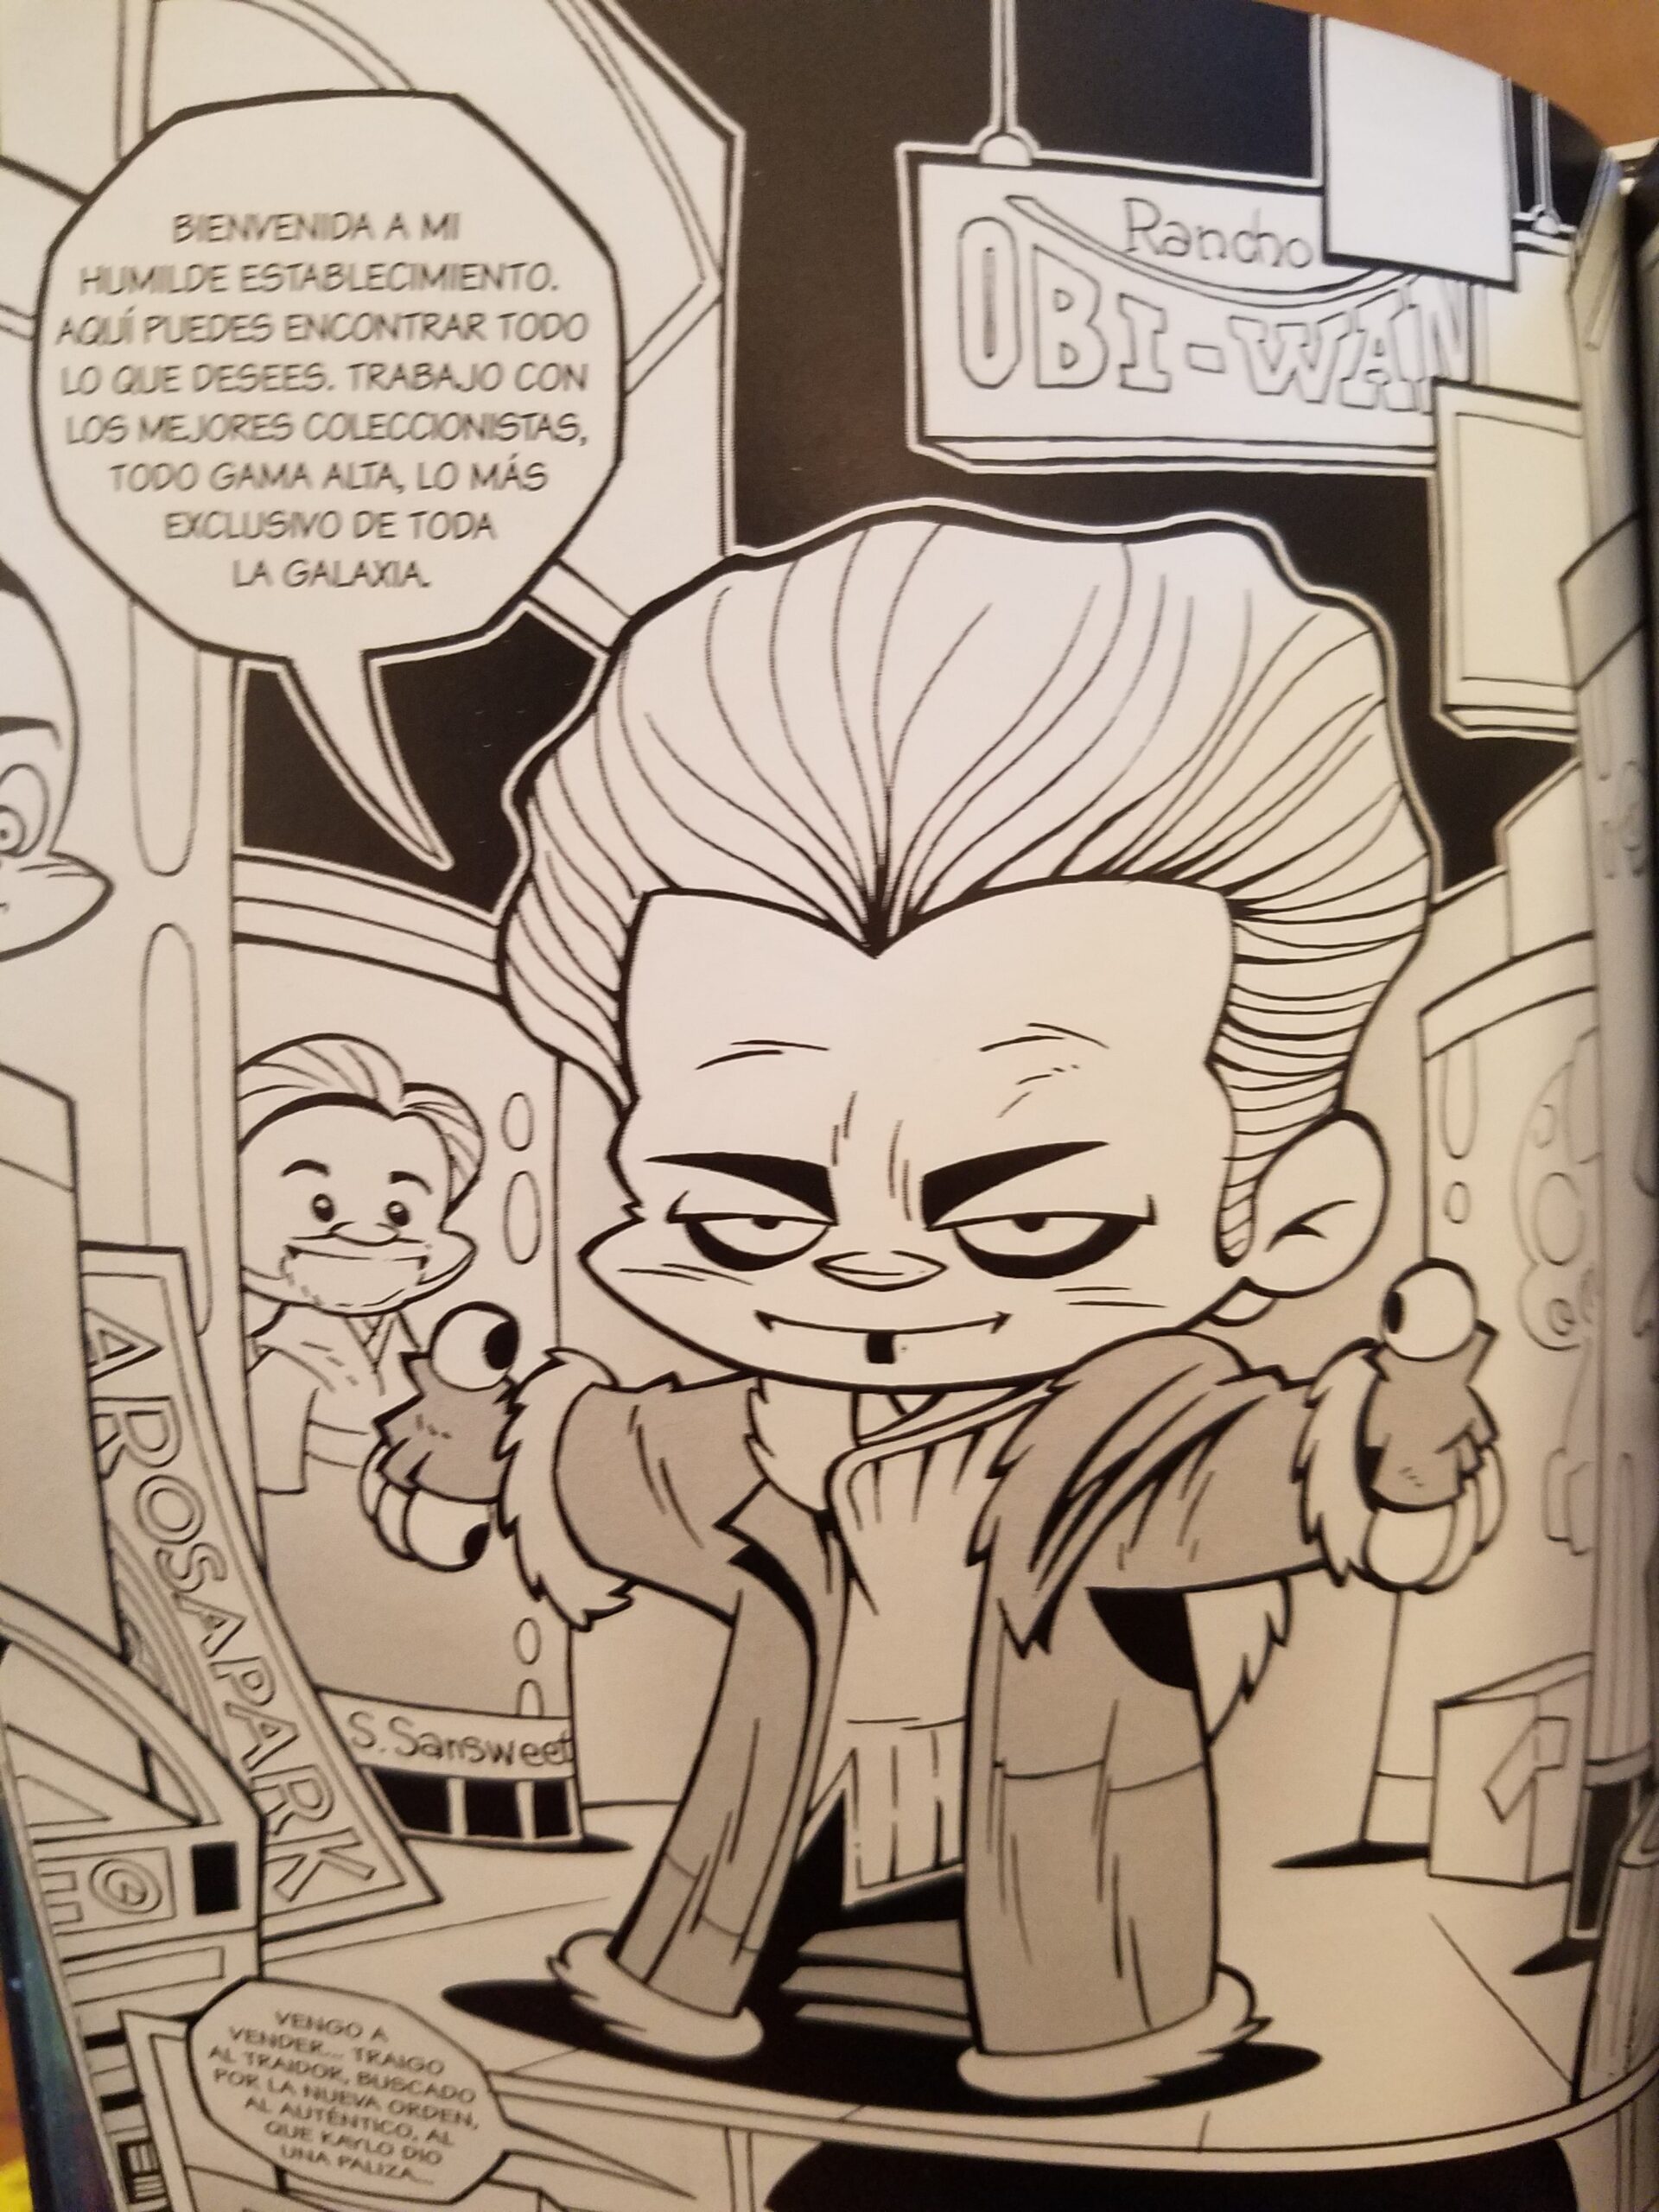 Steve Sansweet and Rancho Obi-Wan featured in The Last Bobblehead graphic novel parody from Spain